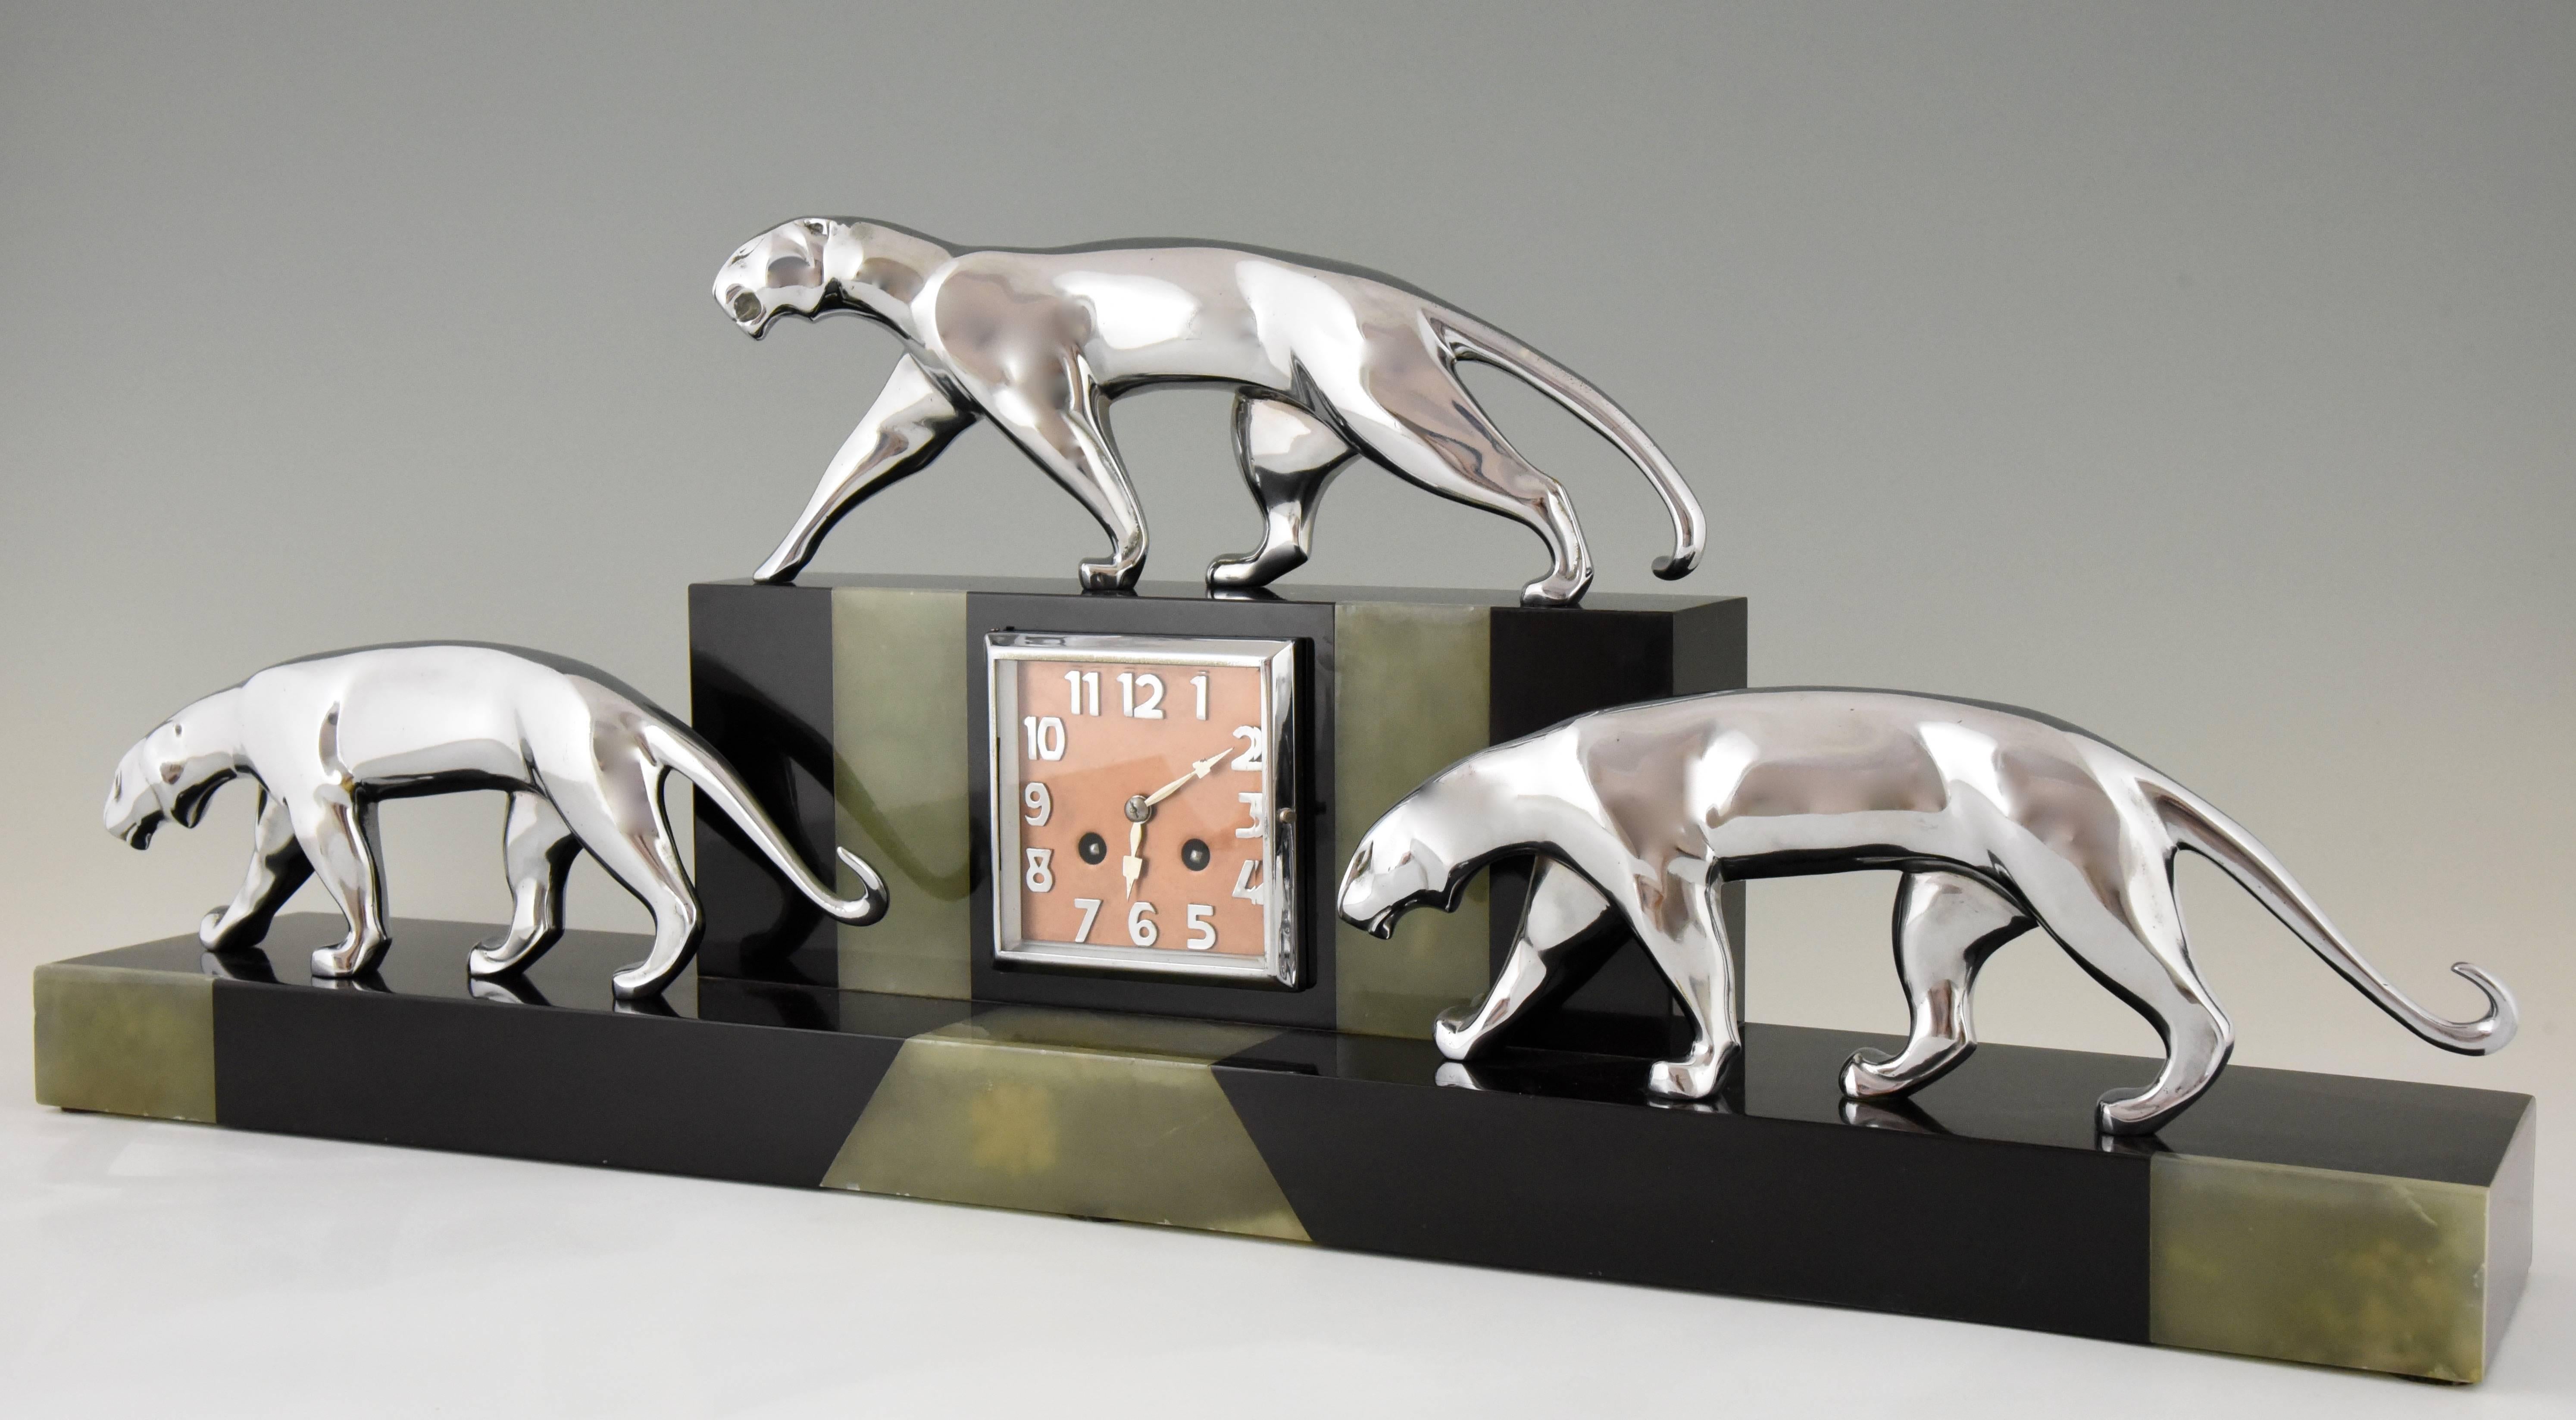 Art Deco clock with three bronze panthers, marble and onyx.
Signature/ Marks: Michel Decoux
Style: Art Deco.
Date: 1920
Material: Chromed bronze panther sculptures. ?Green onyx and Belgian Black marble.
Origin: France
Size: L 80 cm. x H 31 cm